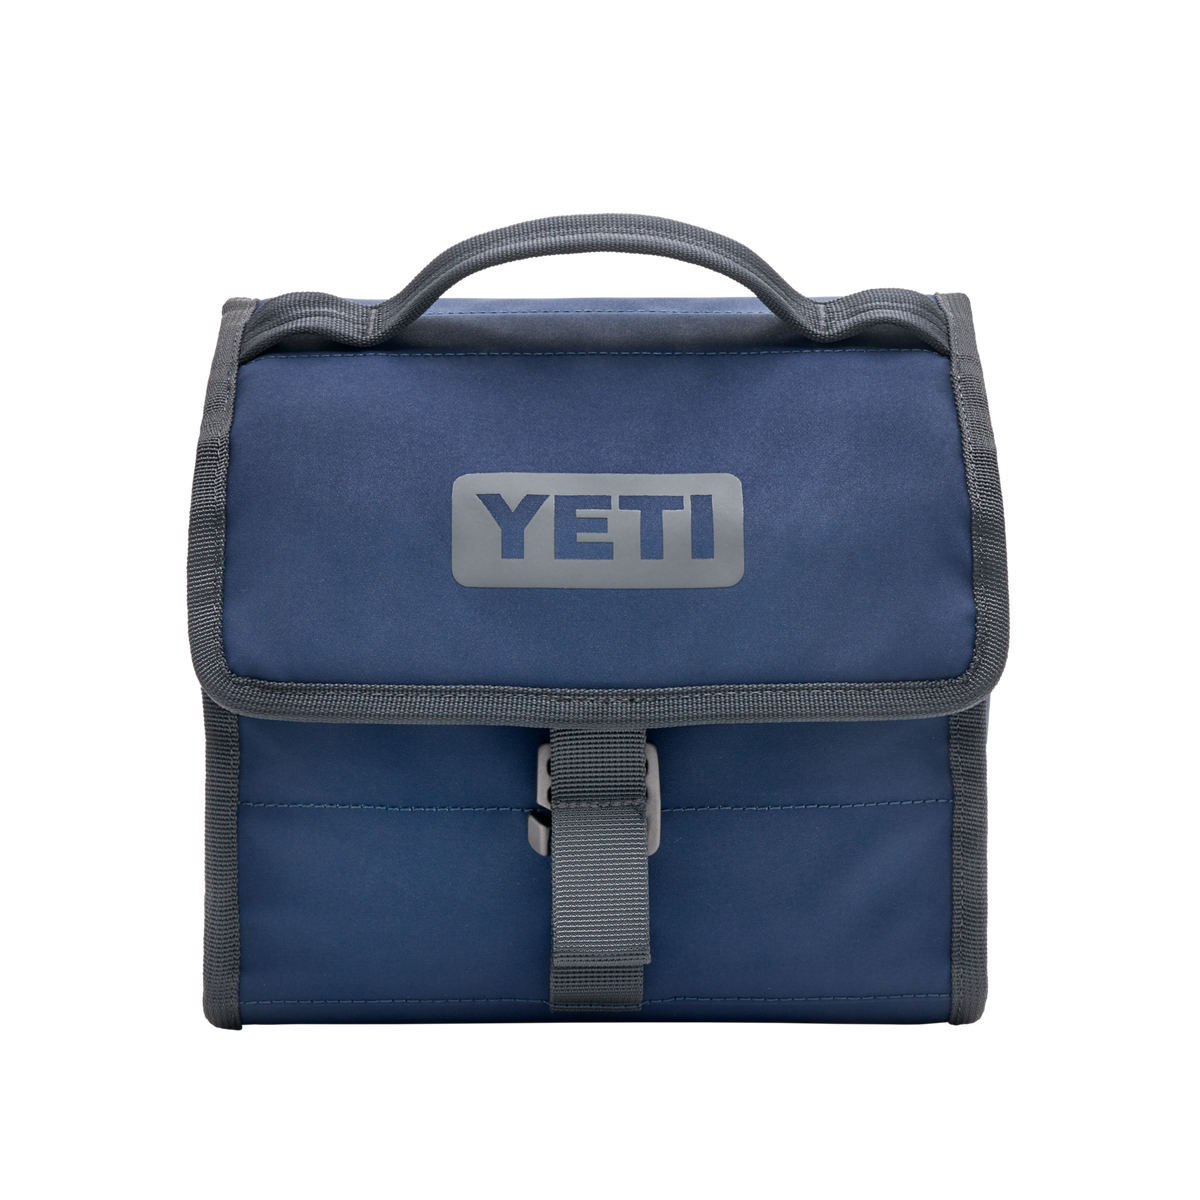 http://www.halfmoonoutfitters.com/cdn/shop/files/W-YETI_20190329_Product_Daytrip_Front_Navy_B_1200x1200.png?v=1697719469